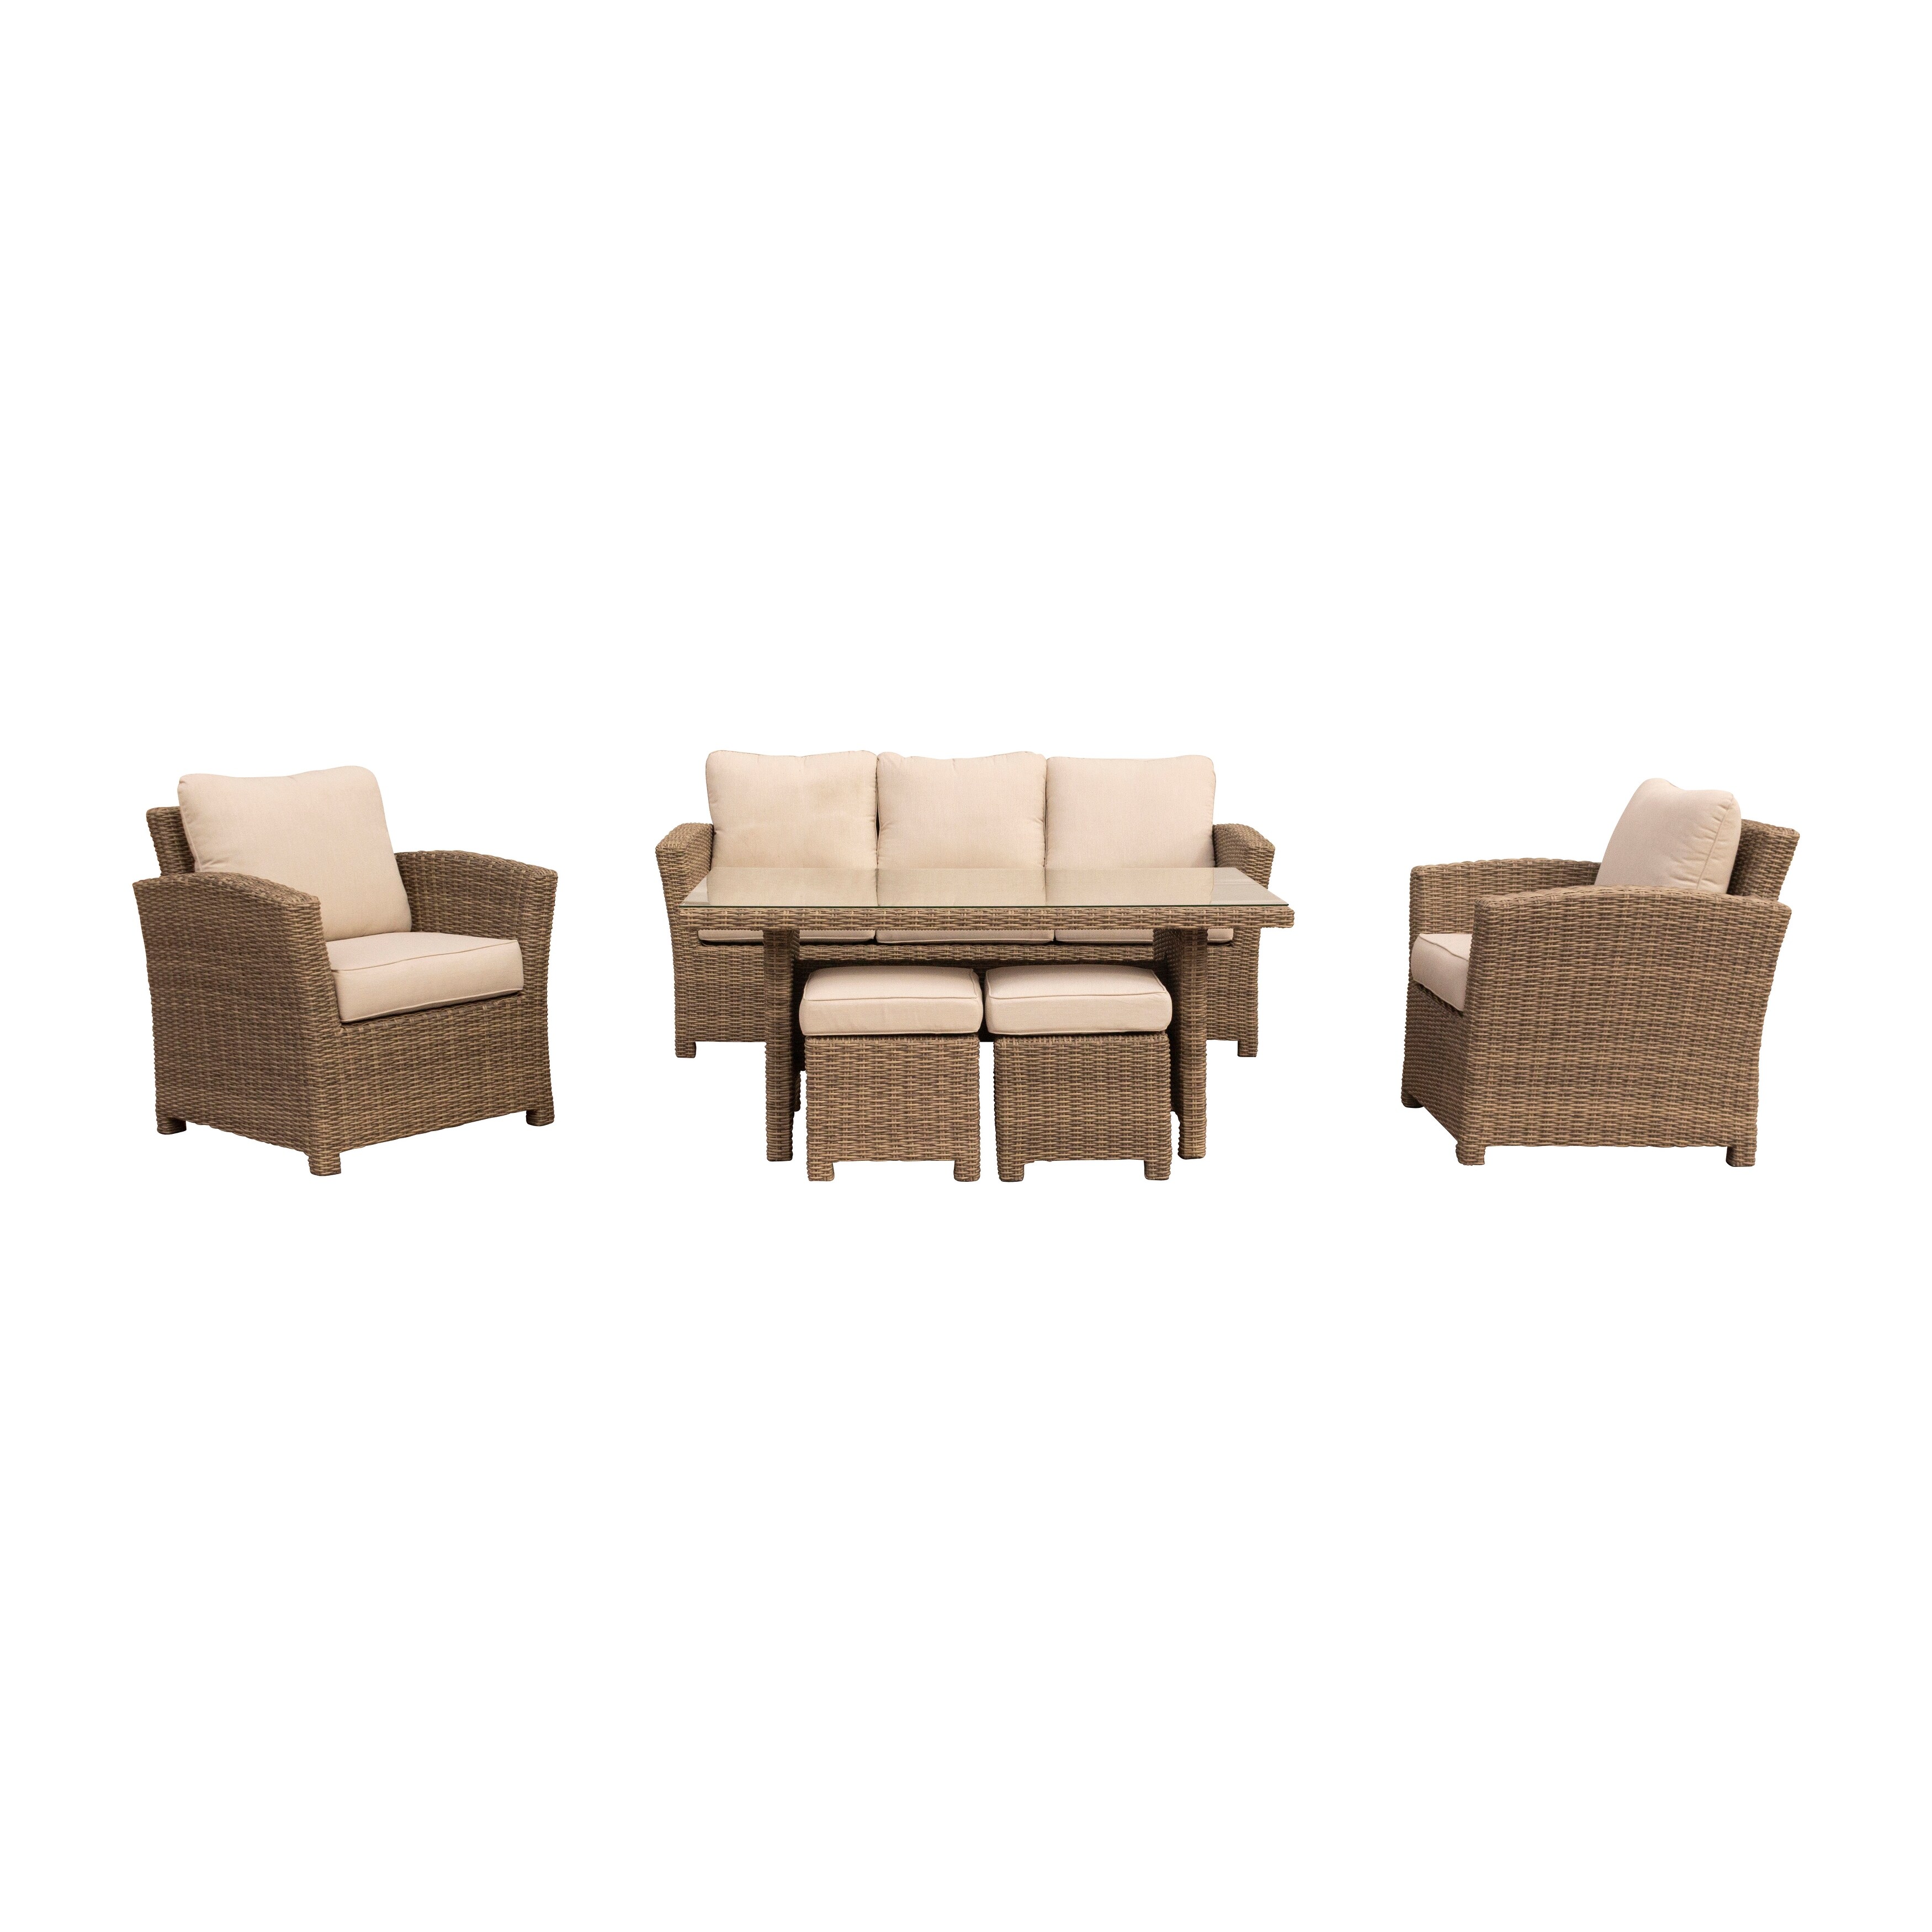 Courtyard Casual Capri 6 Piece Seating Set With 1 Sofa  1 Chow Dining Table  2 Club Chairs  And 2 Ottomans